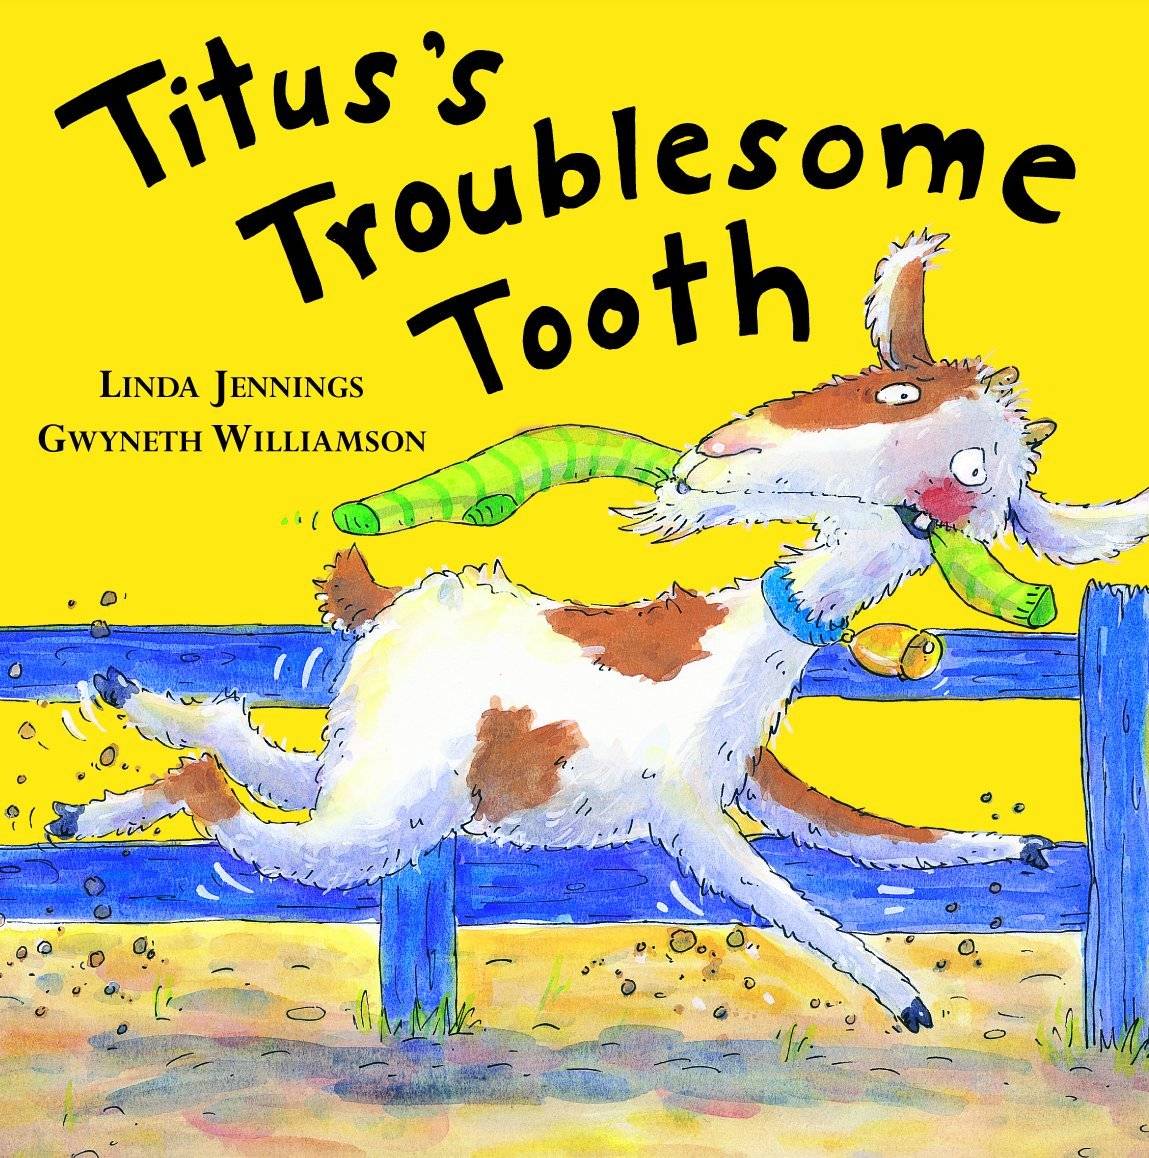 IMG : Titus's Troublesome Tooth